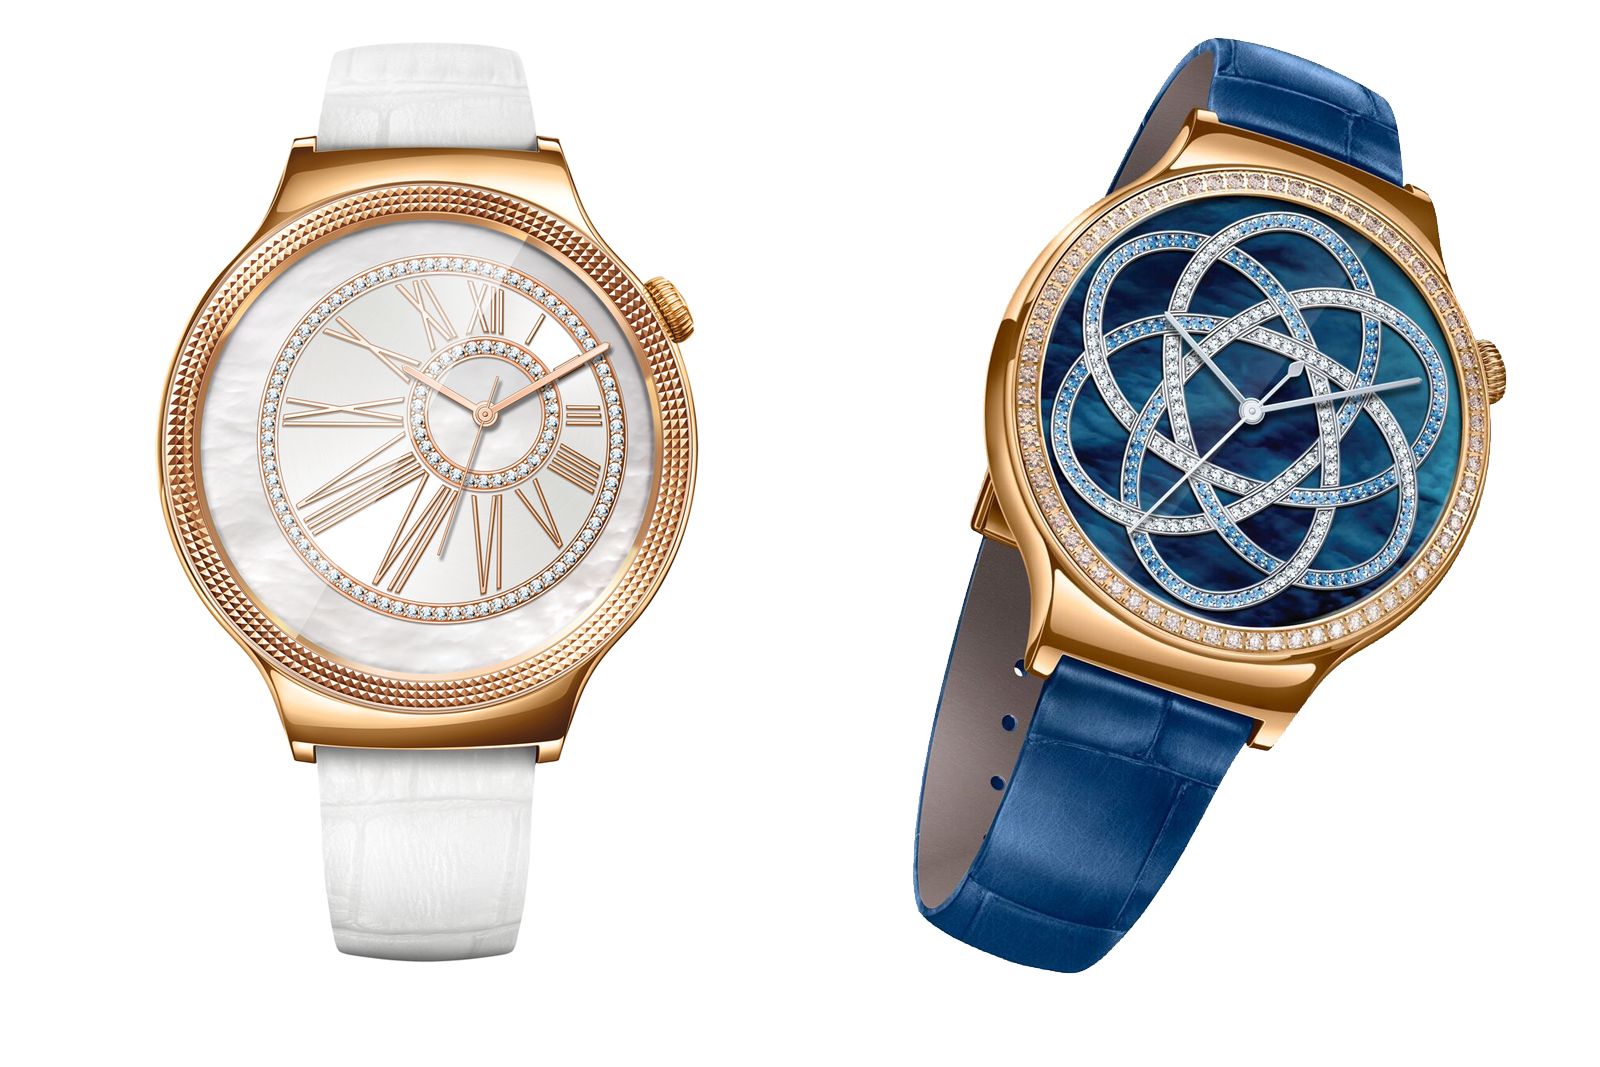 huawei watch jewel and elegant make android wear sparkle image 1